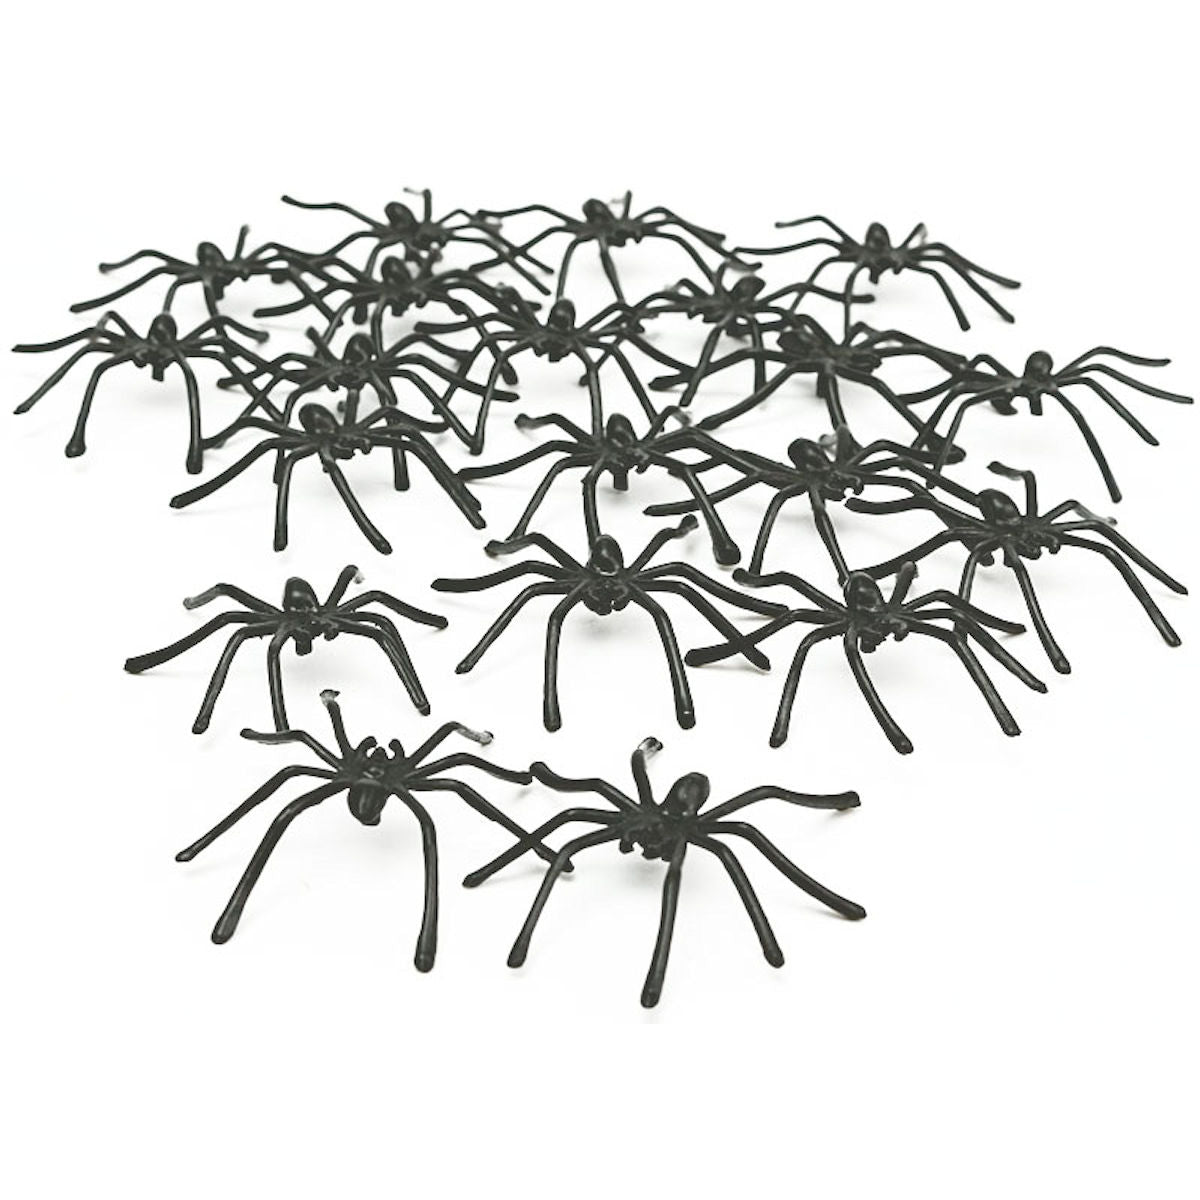 Spiders Infestation Pack of 50 Plastic Creepy Spiders Halloween Decoration